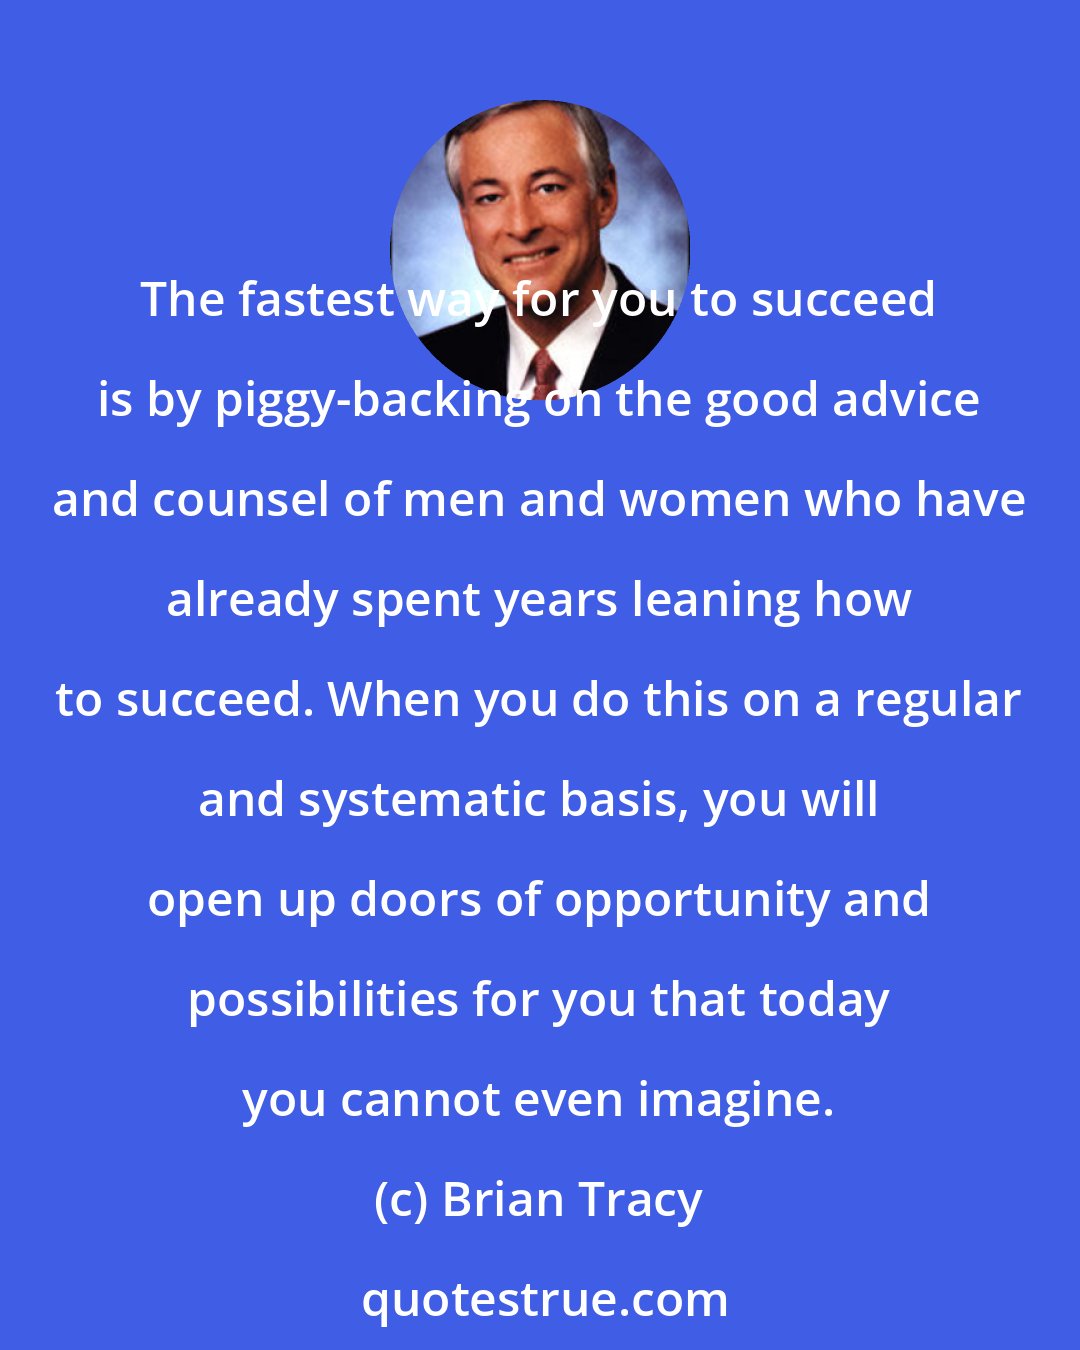 Brian Tracy: The fastest way for you to succeed is by piggy-backing on the good advice and counsel of men and women who have already spent years leaning how to succeed. When you do this on a regular and systematic basis, you will open up doors of opportunity and possibilities for you that today you cannot even imagine.